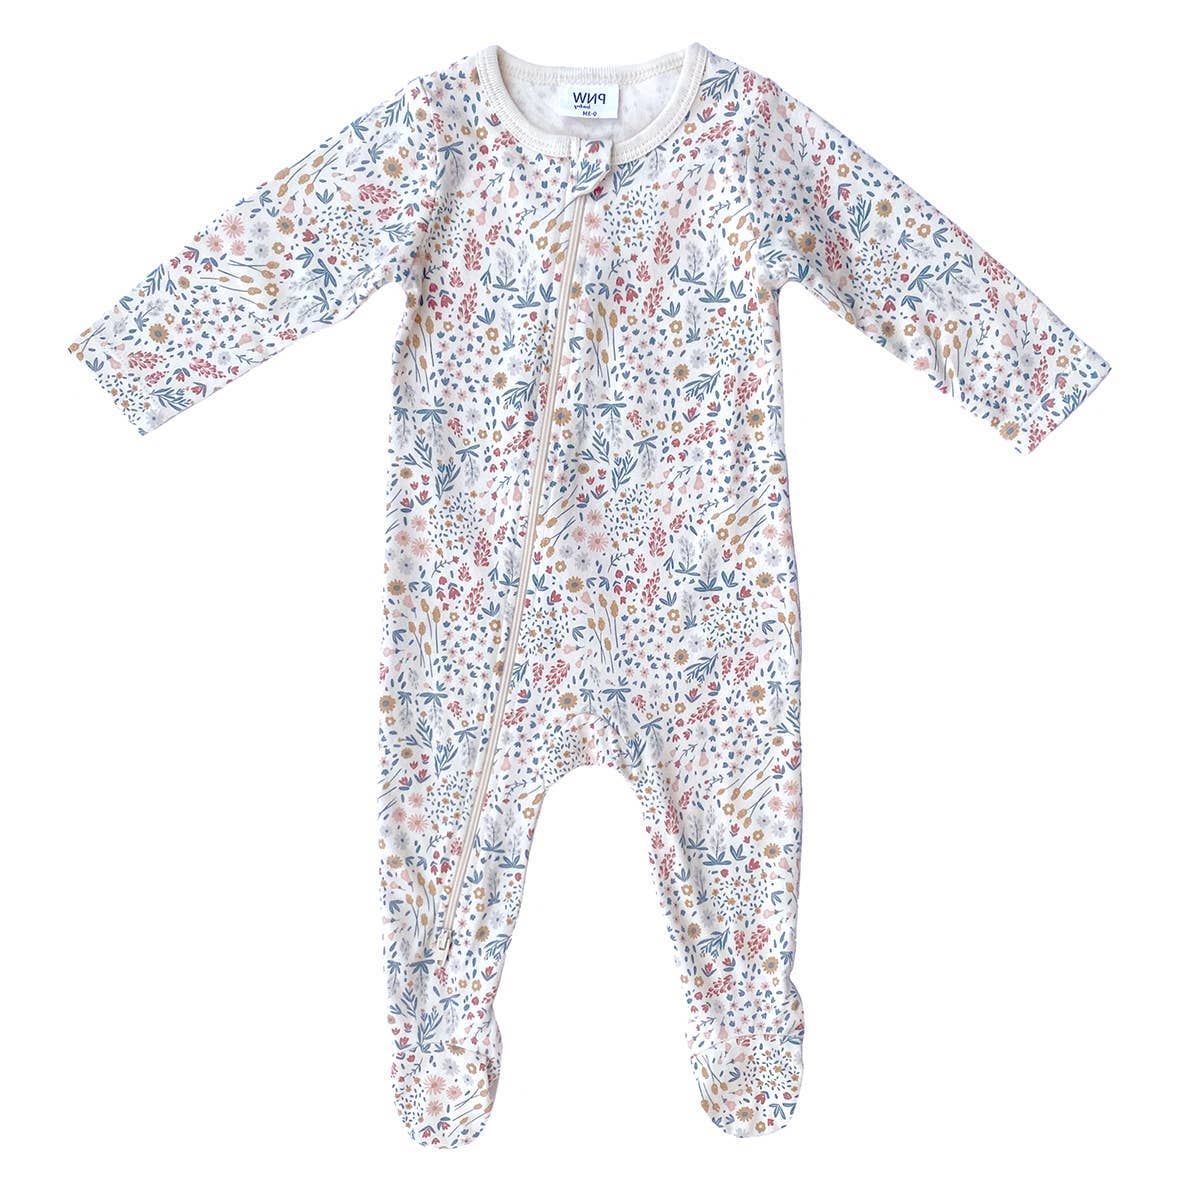 City Mouse Studio - PNW Baby Footed Zip Romper- Mountain Meadow